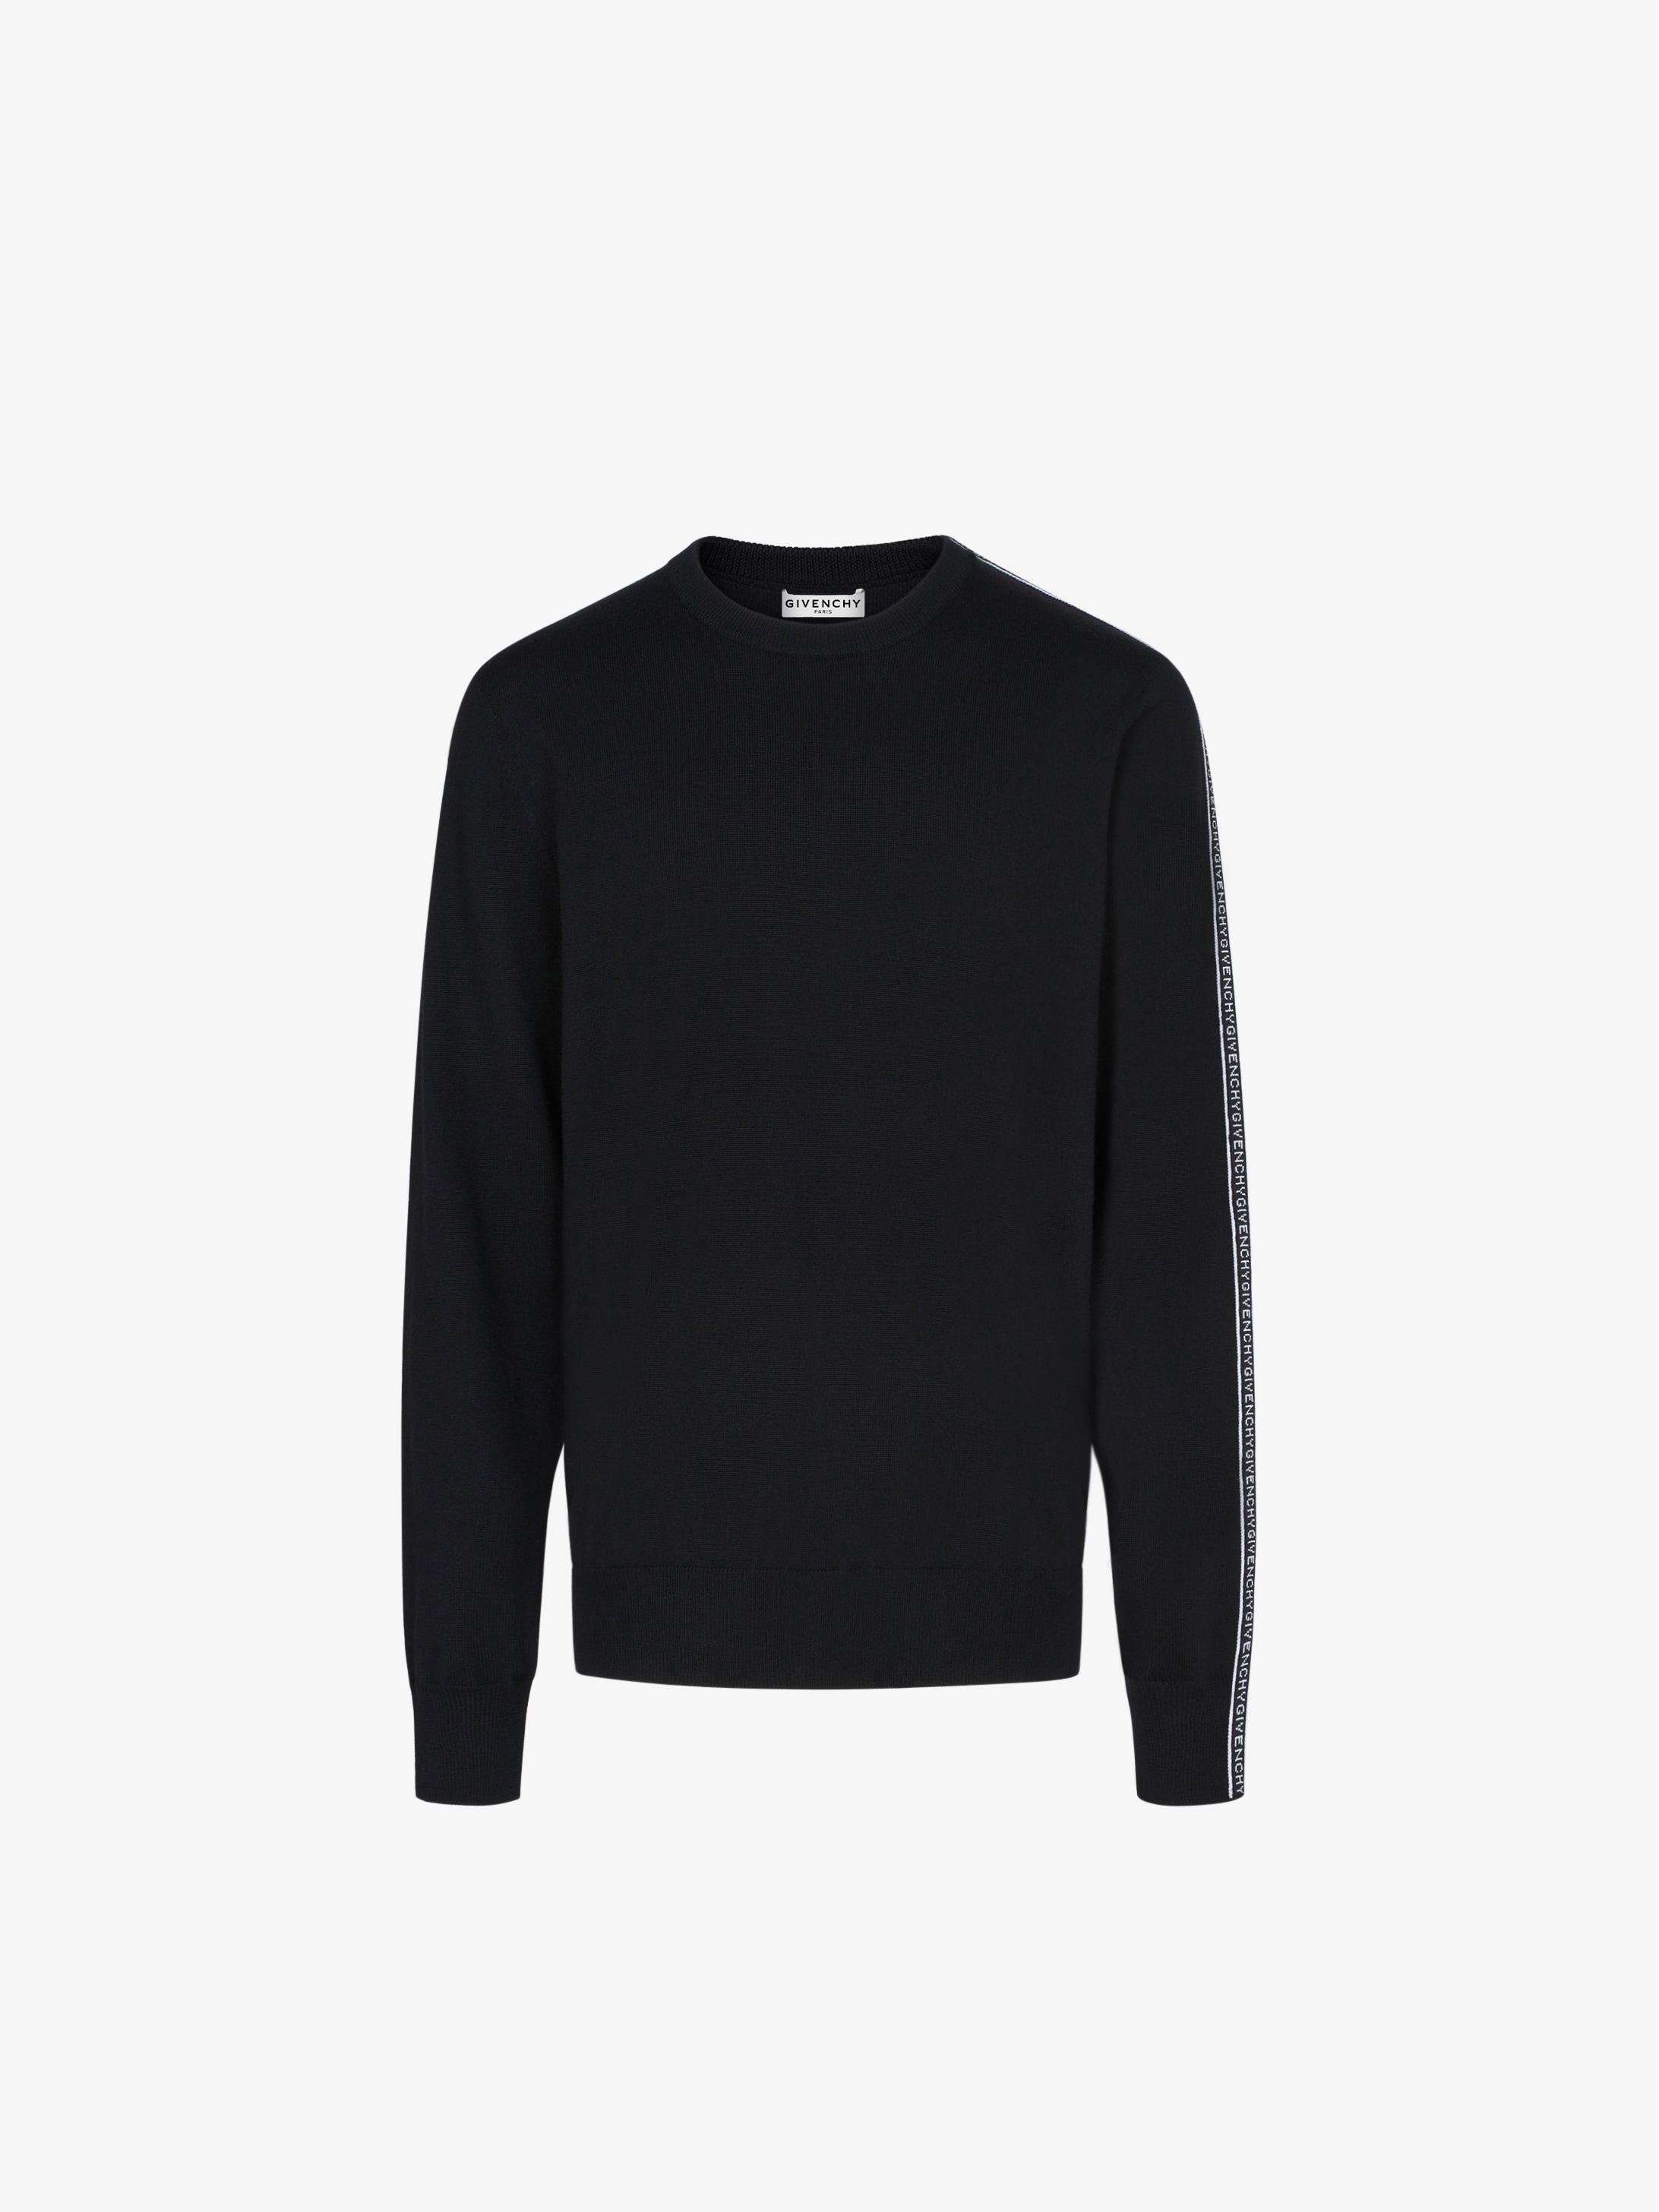 GIVENCHY sweater in wool | GIVENCHY Paris